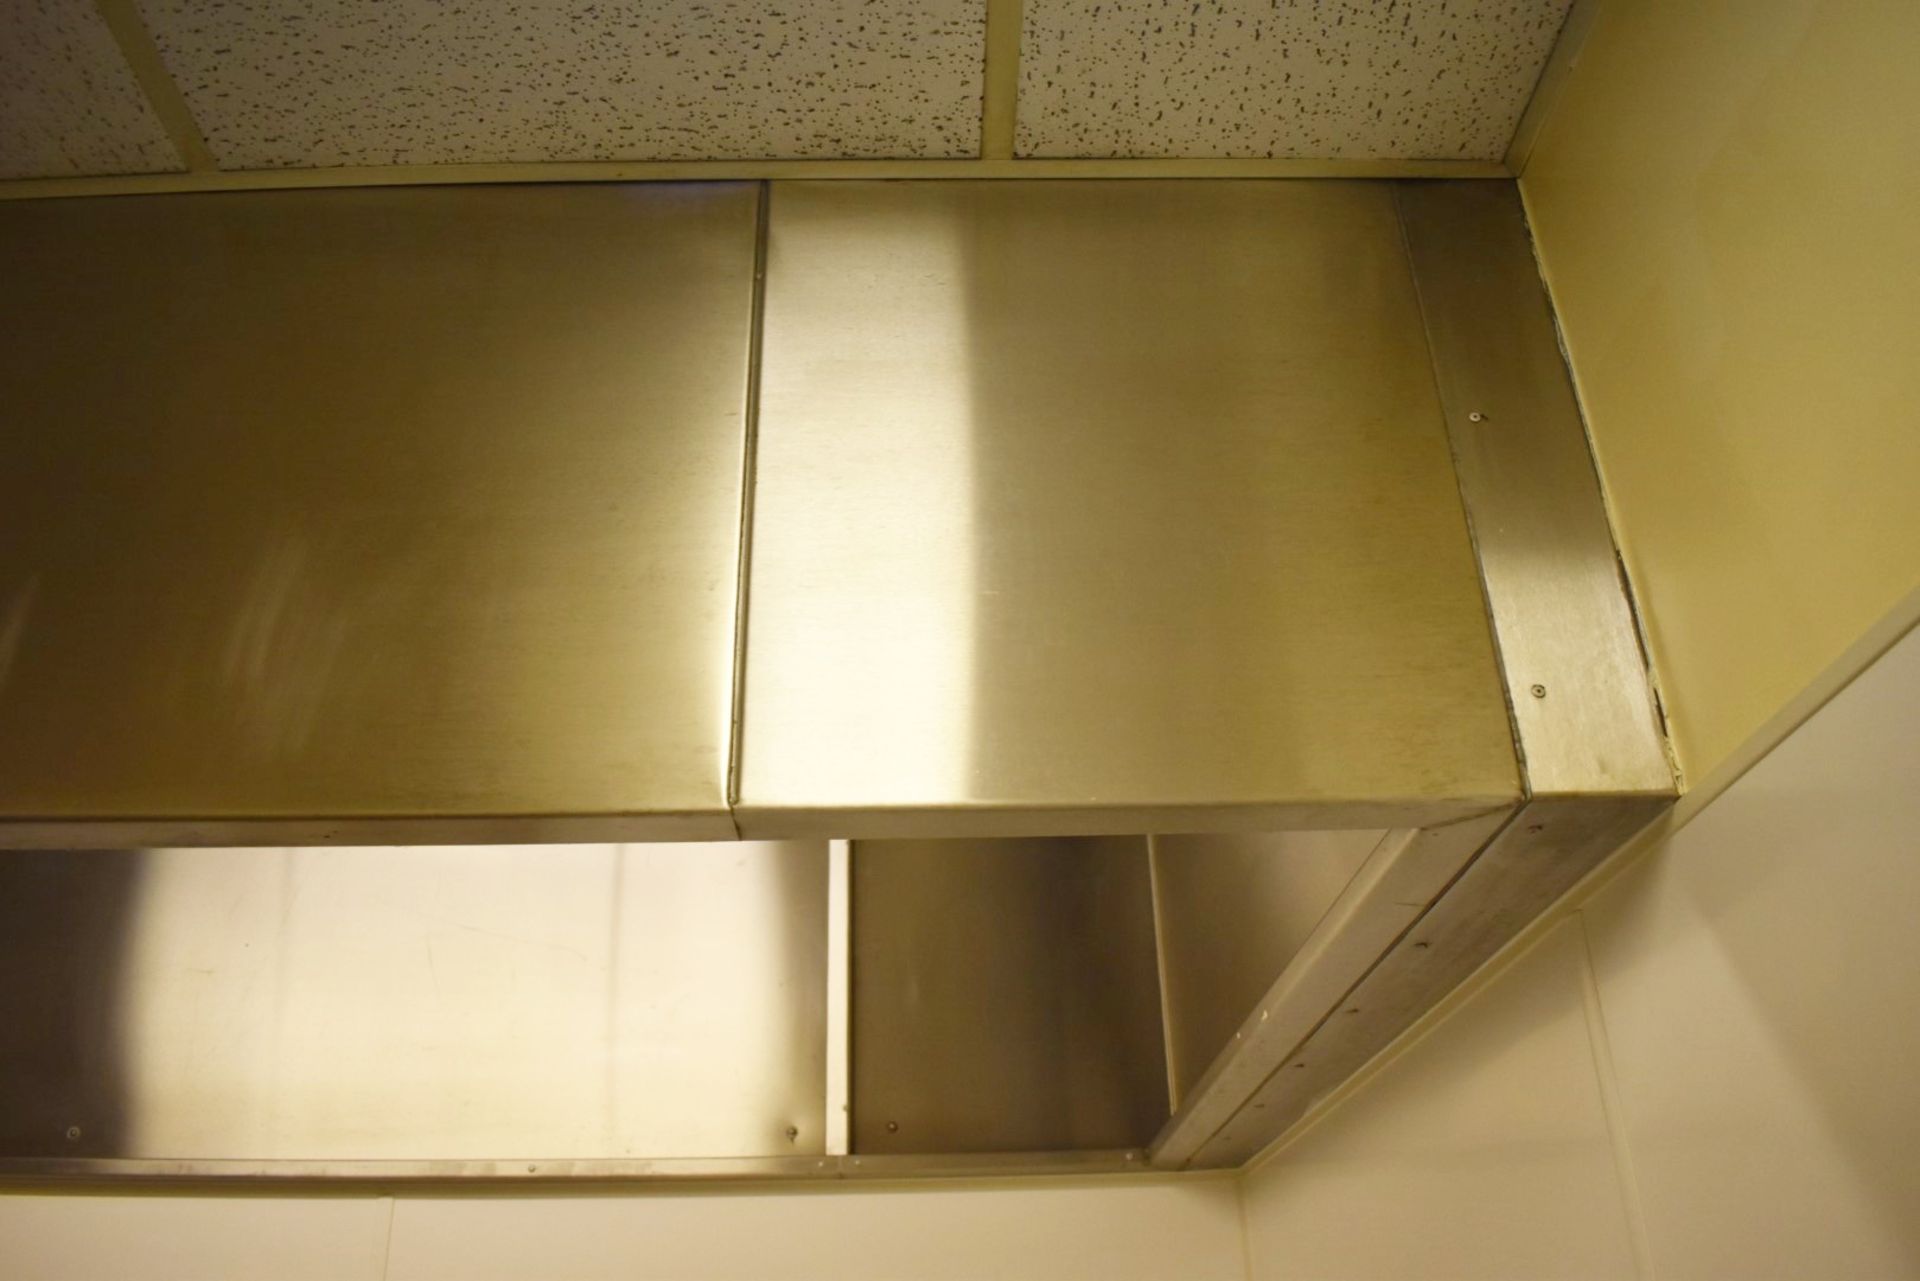 1 x Commerical Kitchen Ceiling Mounted Extractor Hood - Stainless Steel - Breaks into Multiple Parts - Image 4 of 8